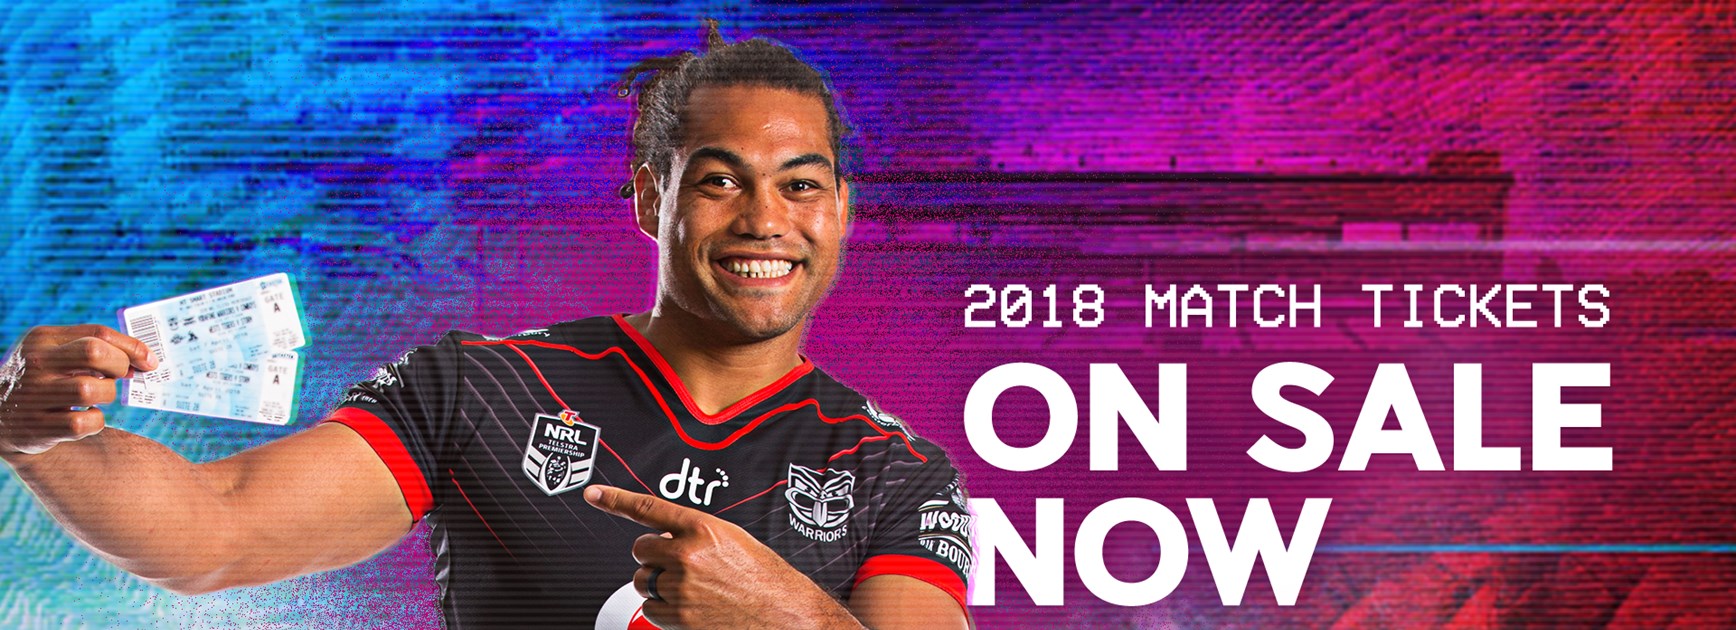 Tickets on sale for all Vodafone Warriors games